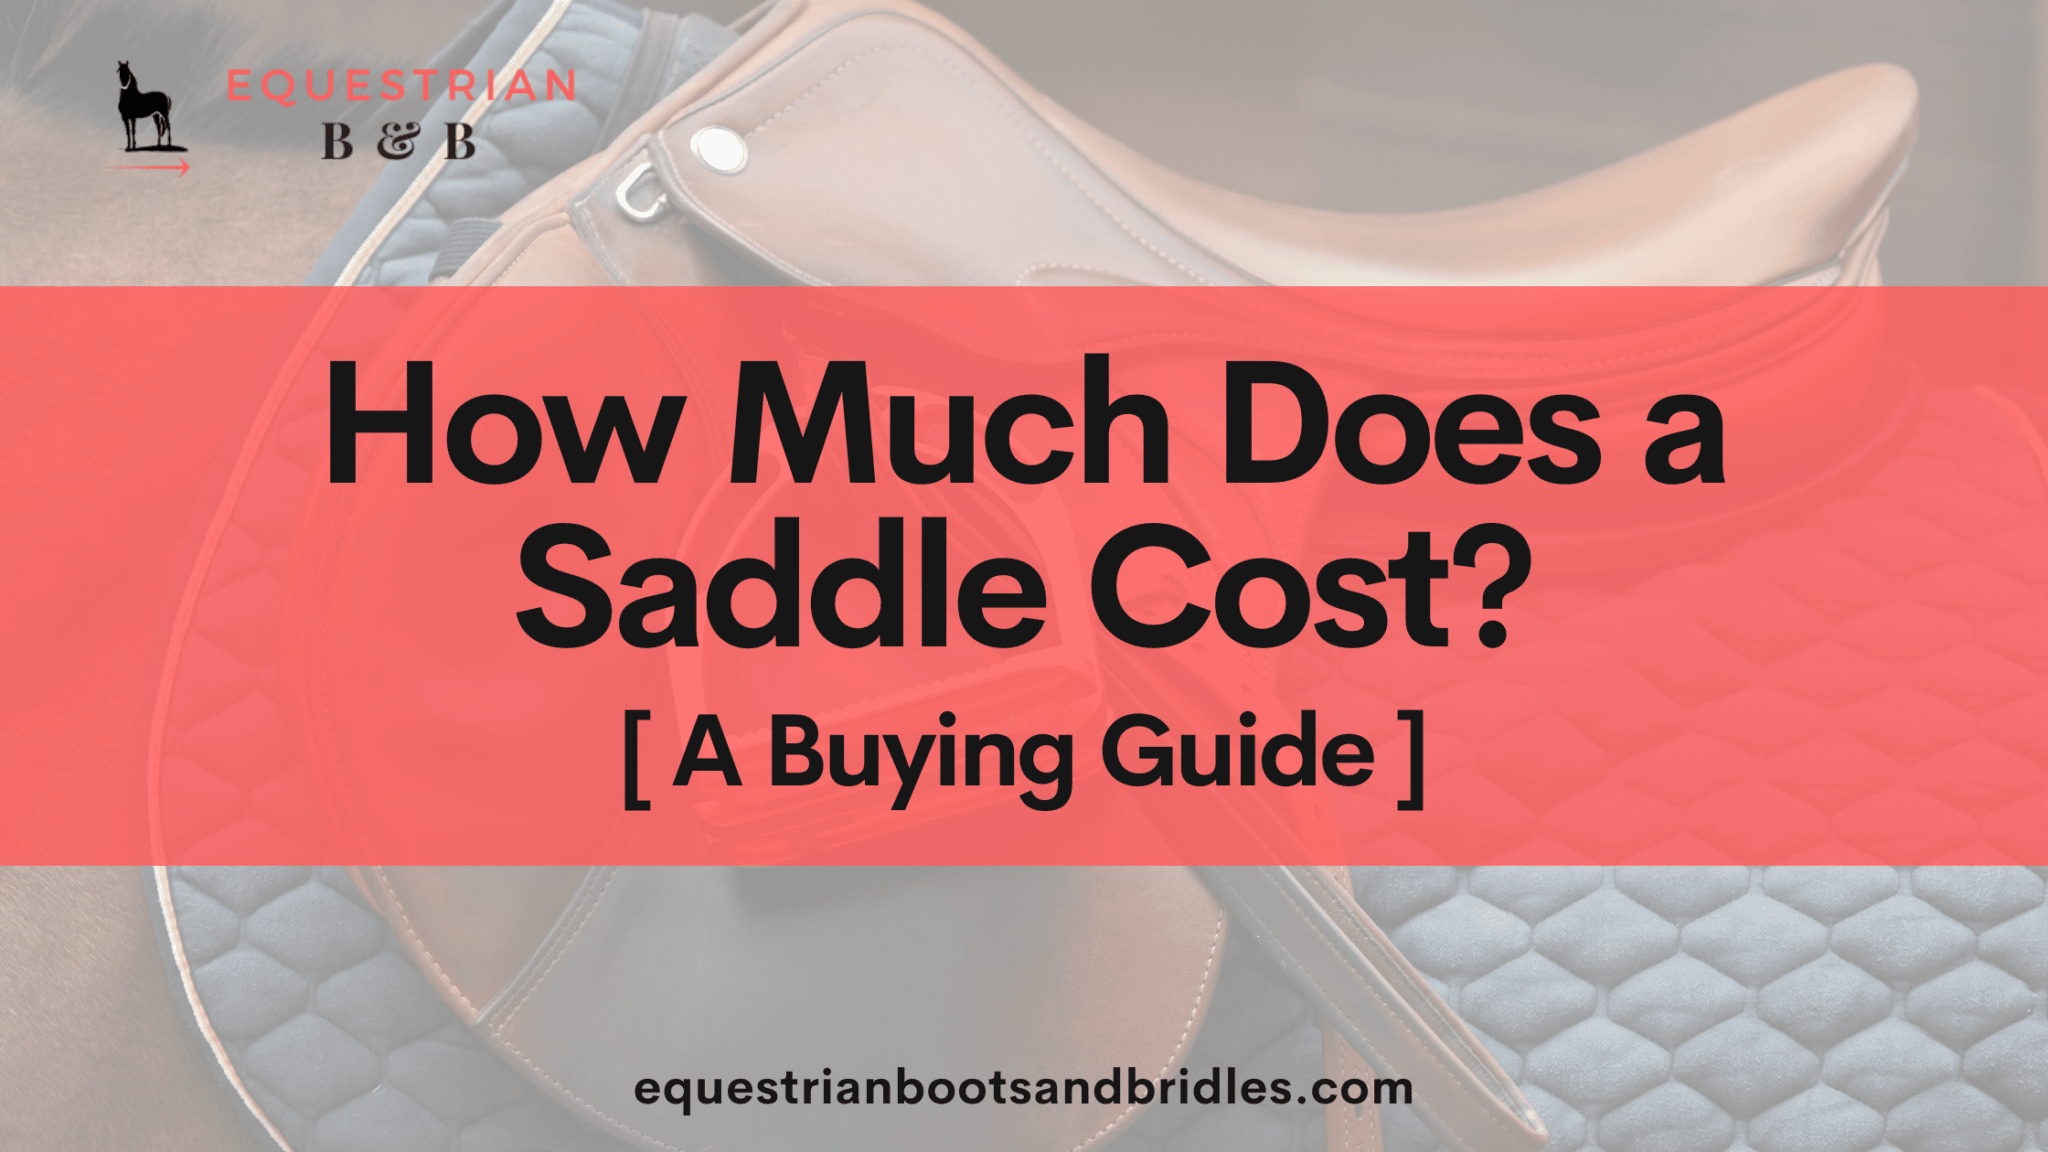 how much does a saddle cost on equestrianbootsandbridles.com